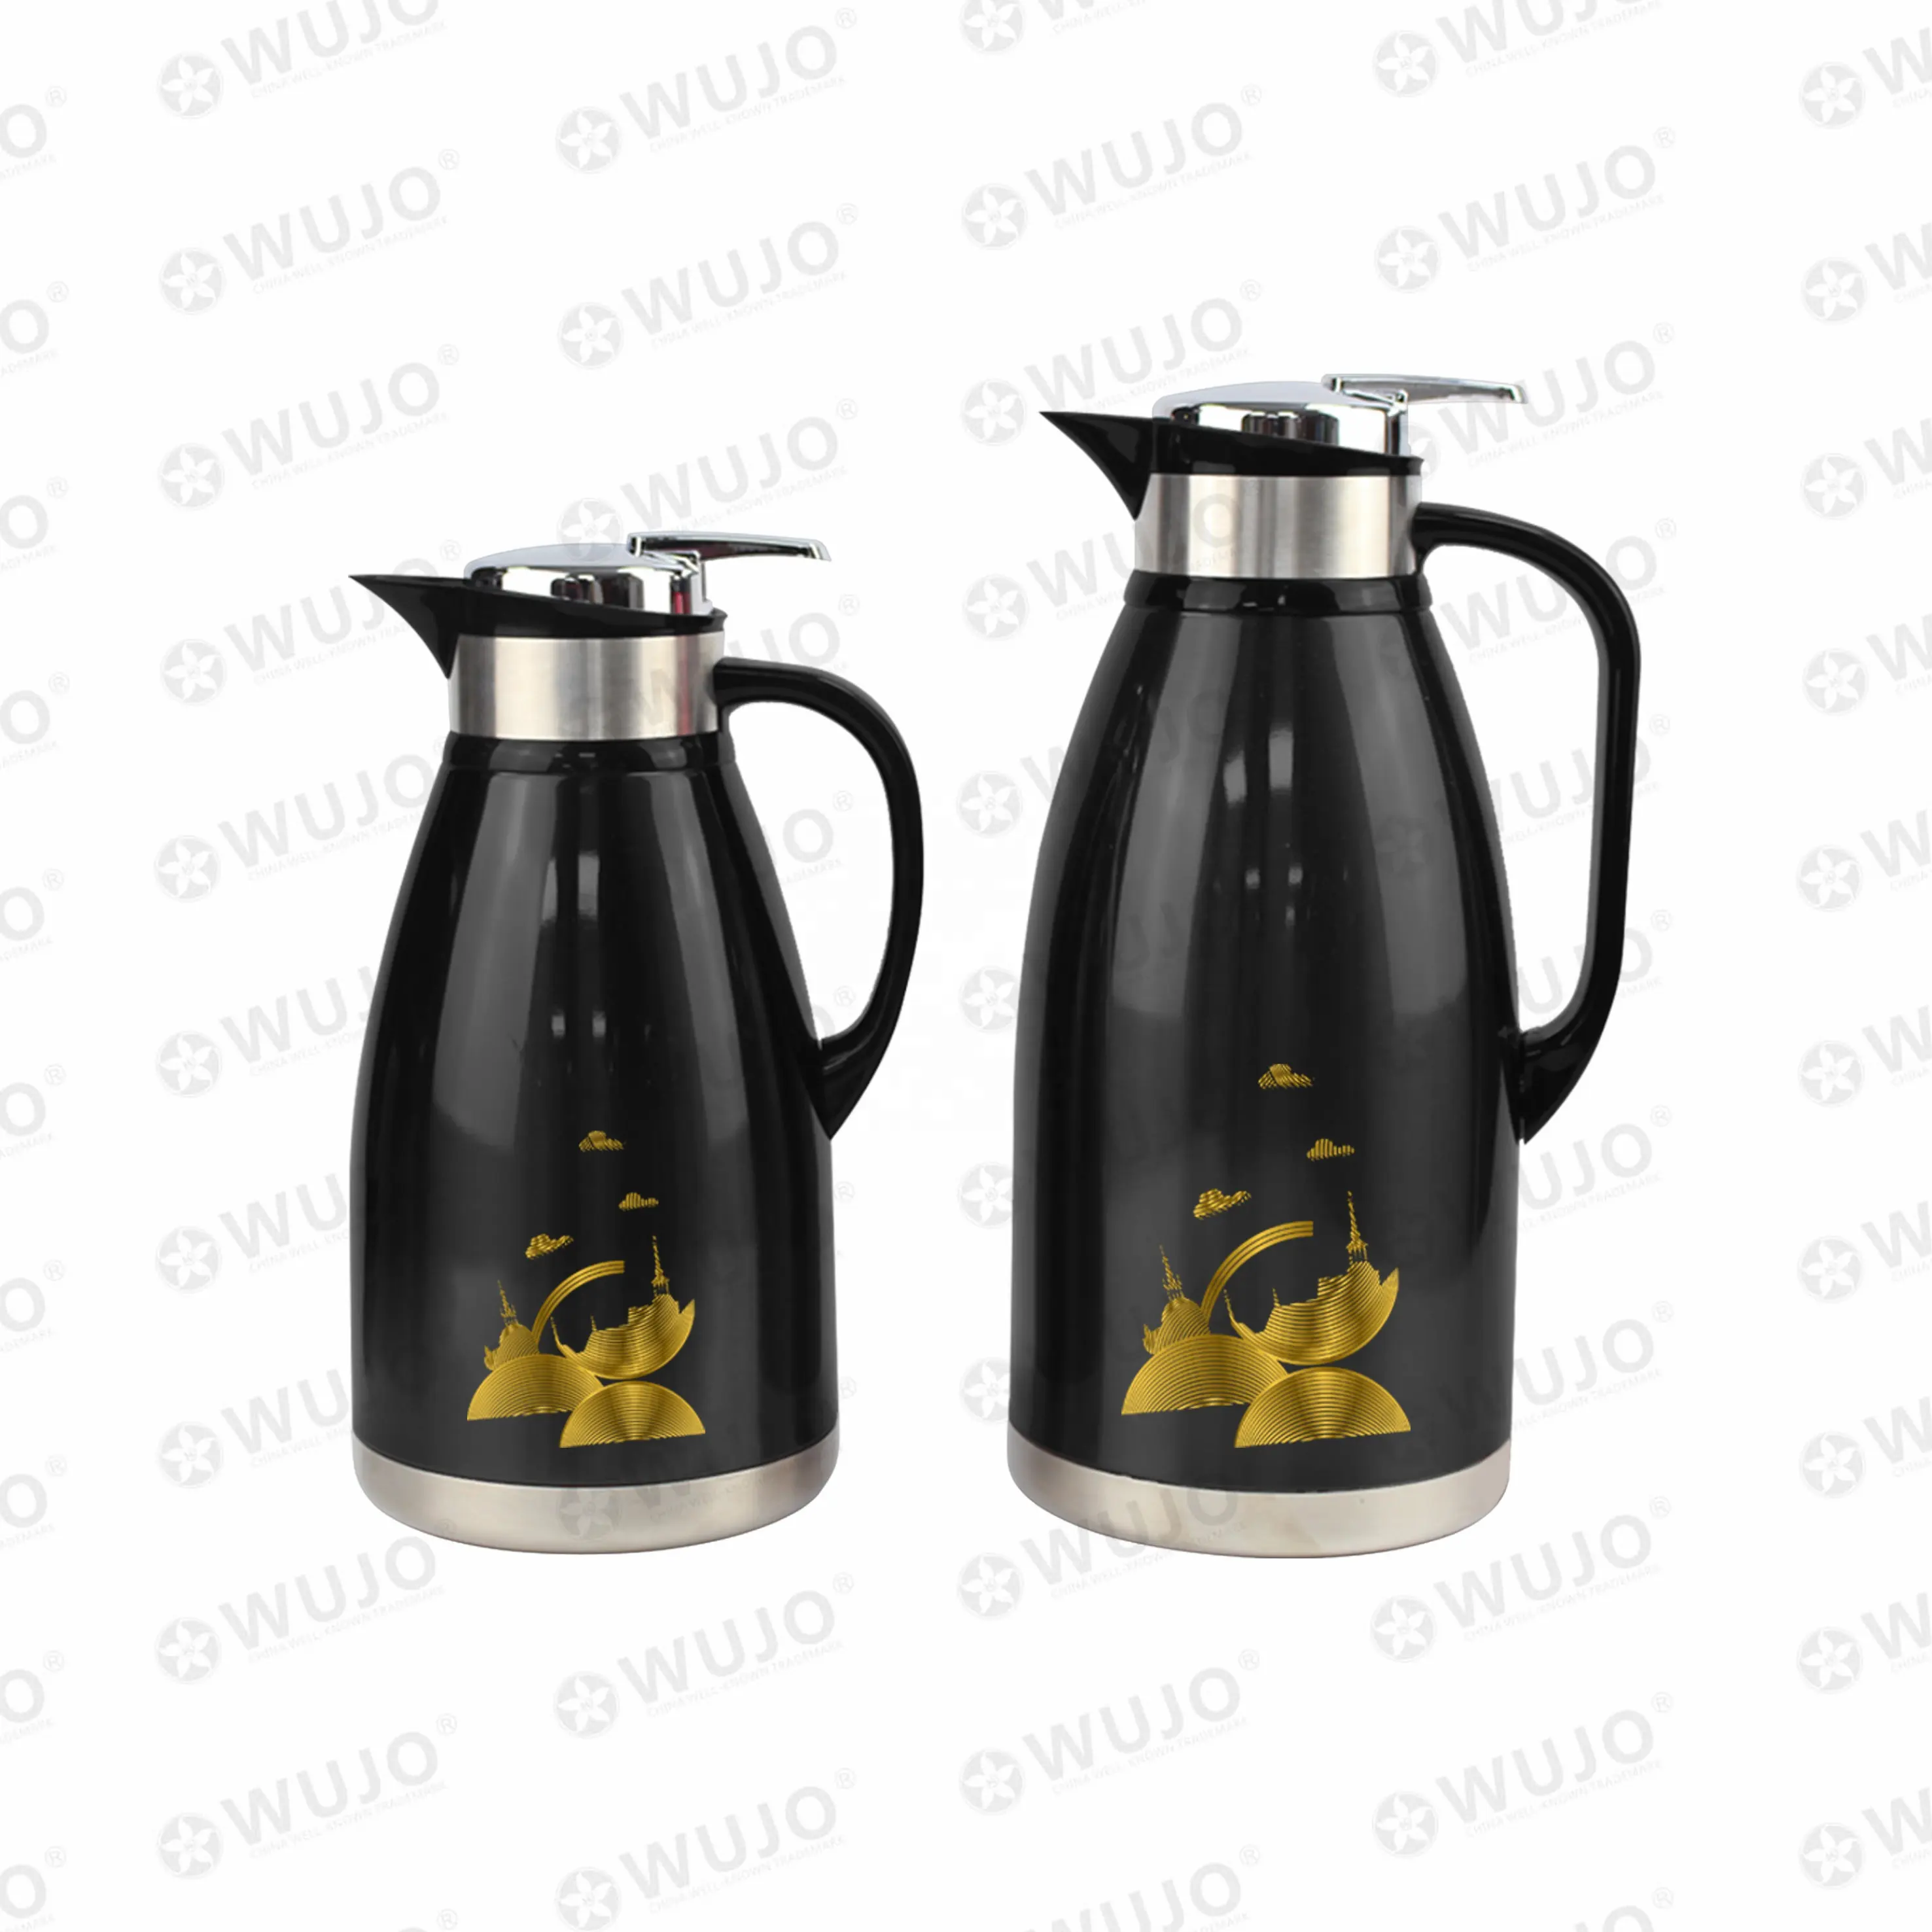 Afghanistan 2l 3l insulated double wall stainless steel vacuum flask & thermos / coffee pot / vacuum jug from WUJO